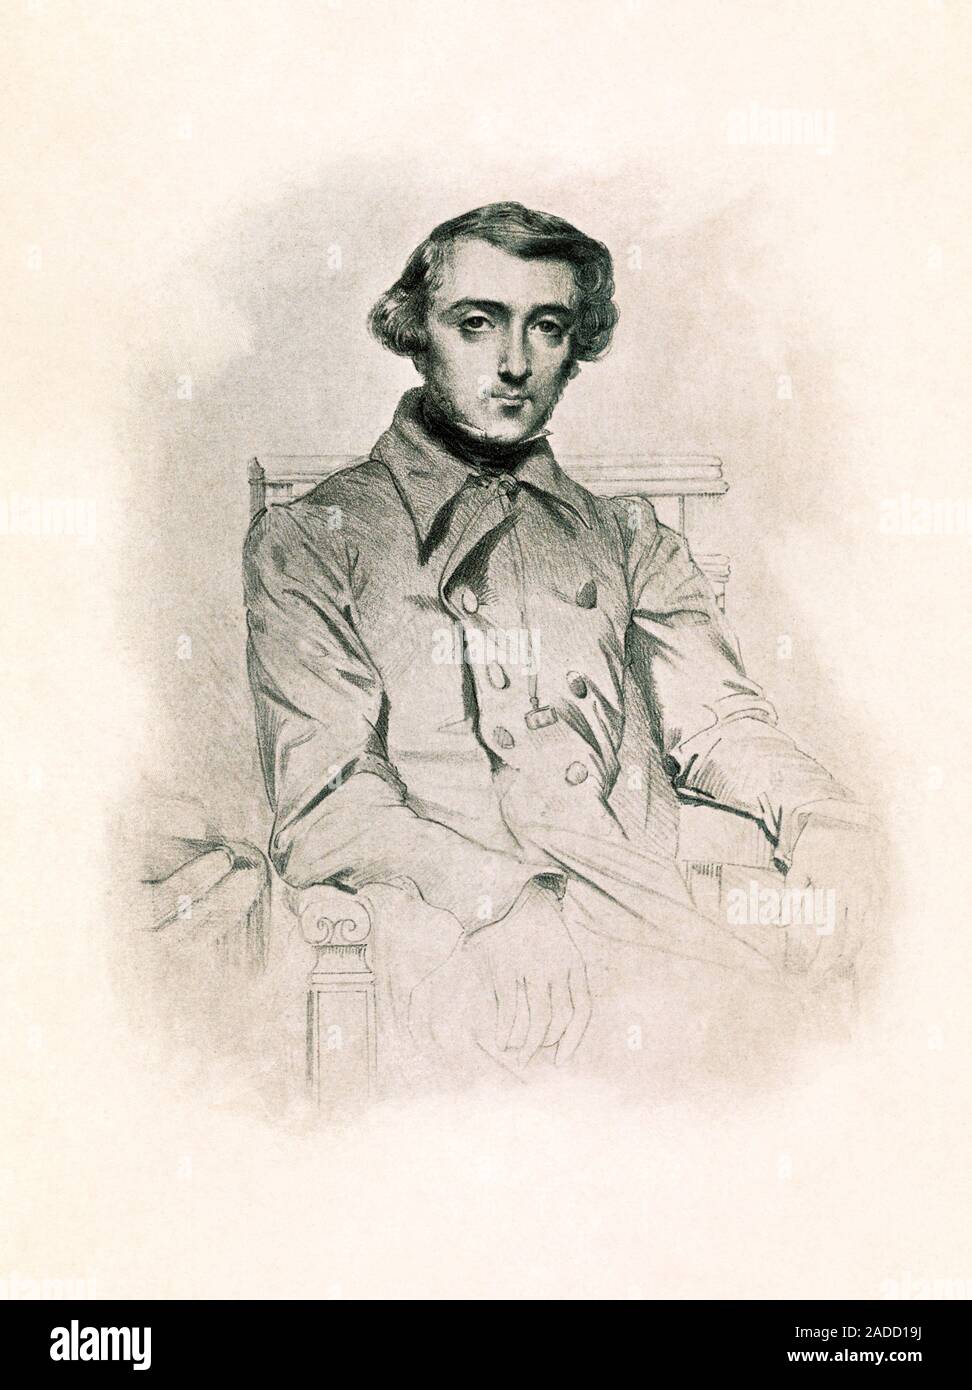 Alexis de Tocqueville (1805-1859), French historian and statesman. Alexis Charles Henri Maurice Clerel de Tocqueville wrote many works on French polit Stock Photo